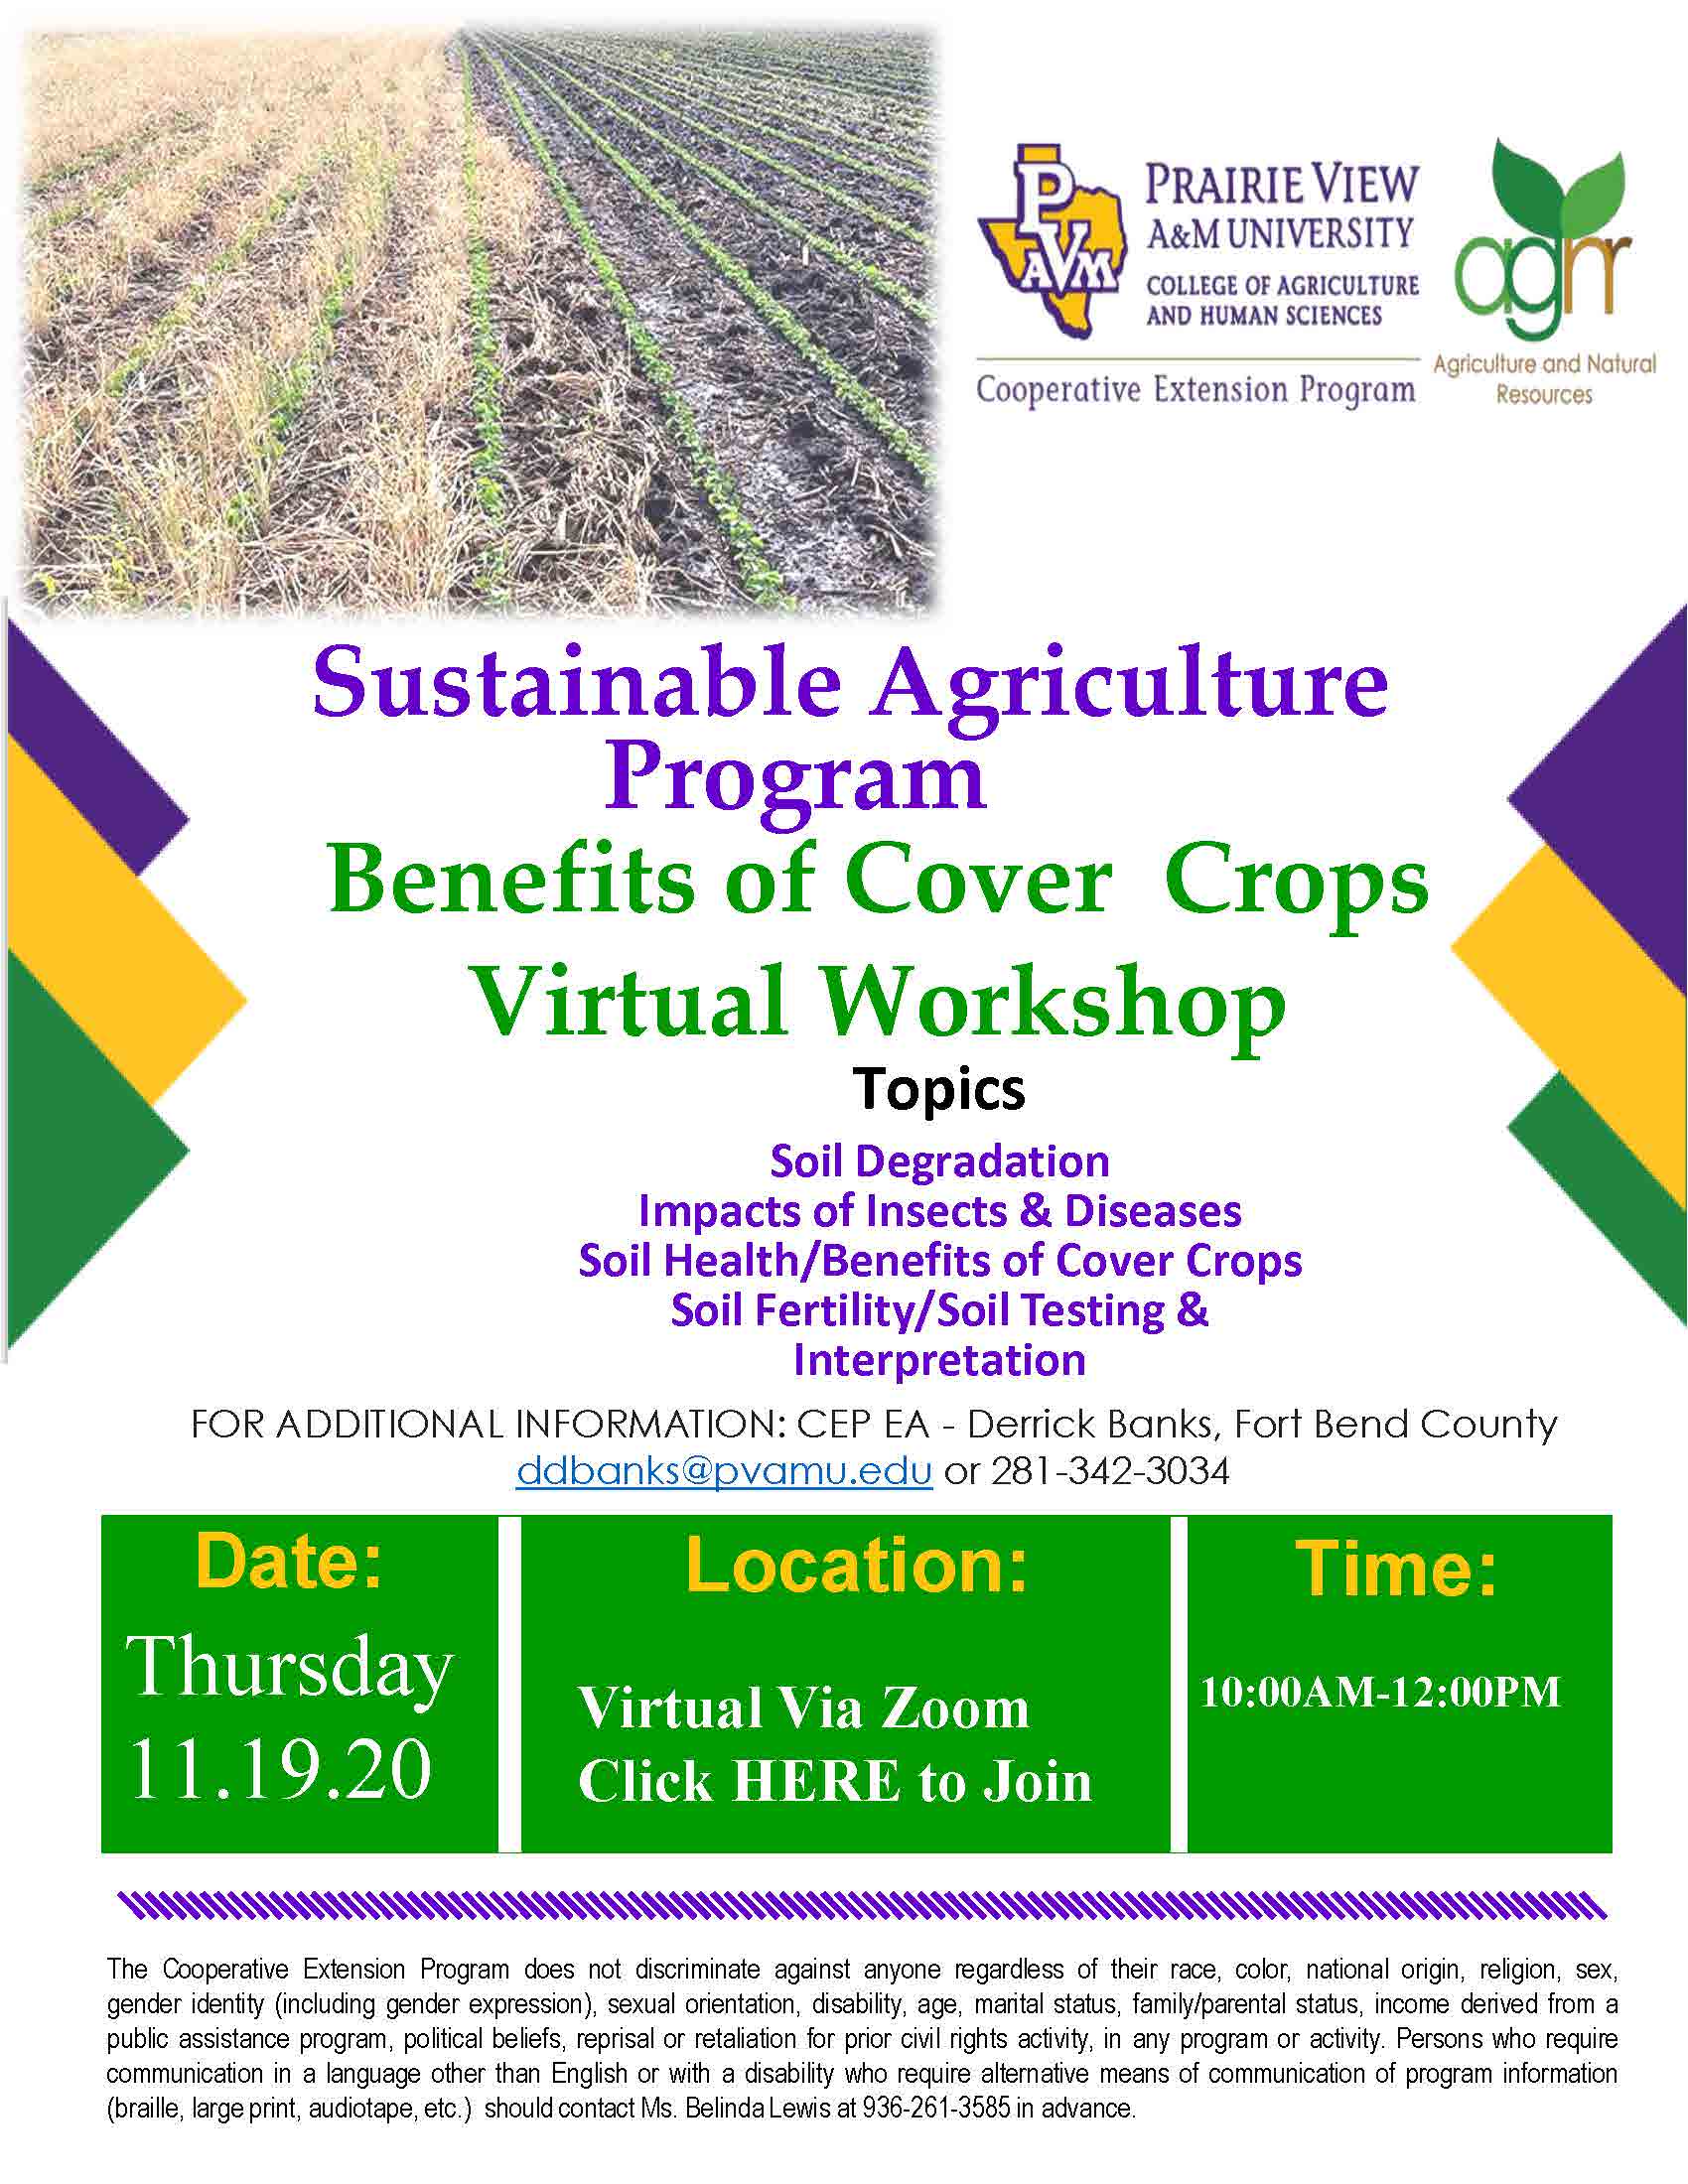 Benefits of Cover Crops Virtual Workshop